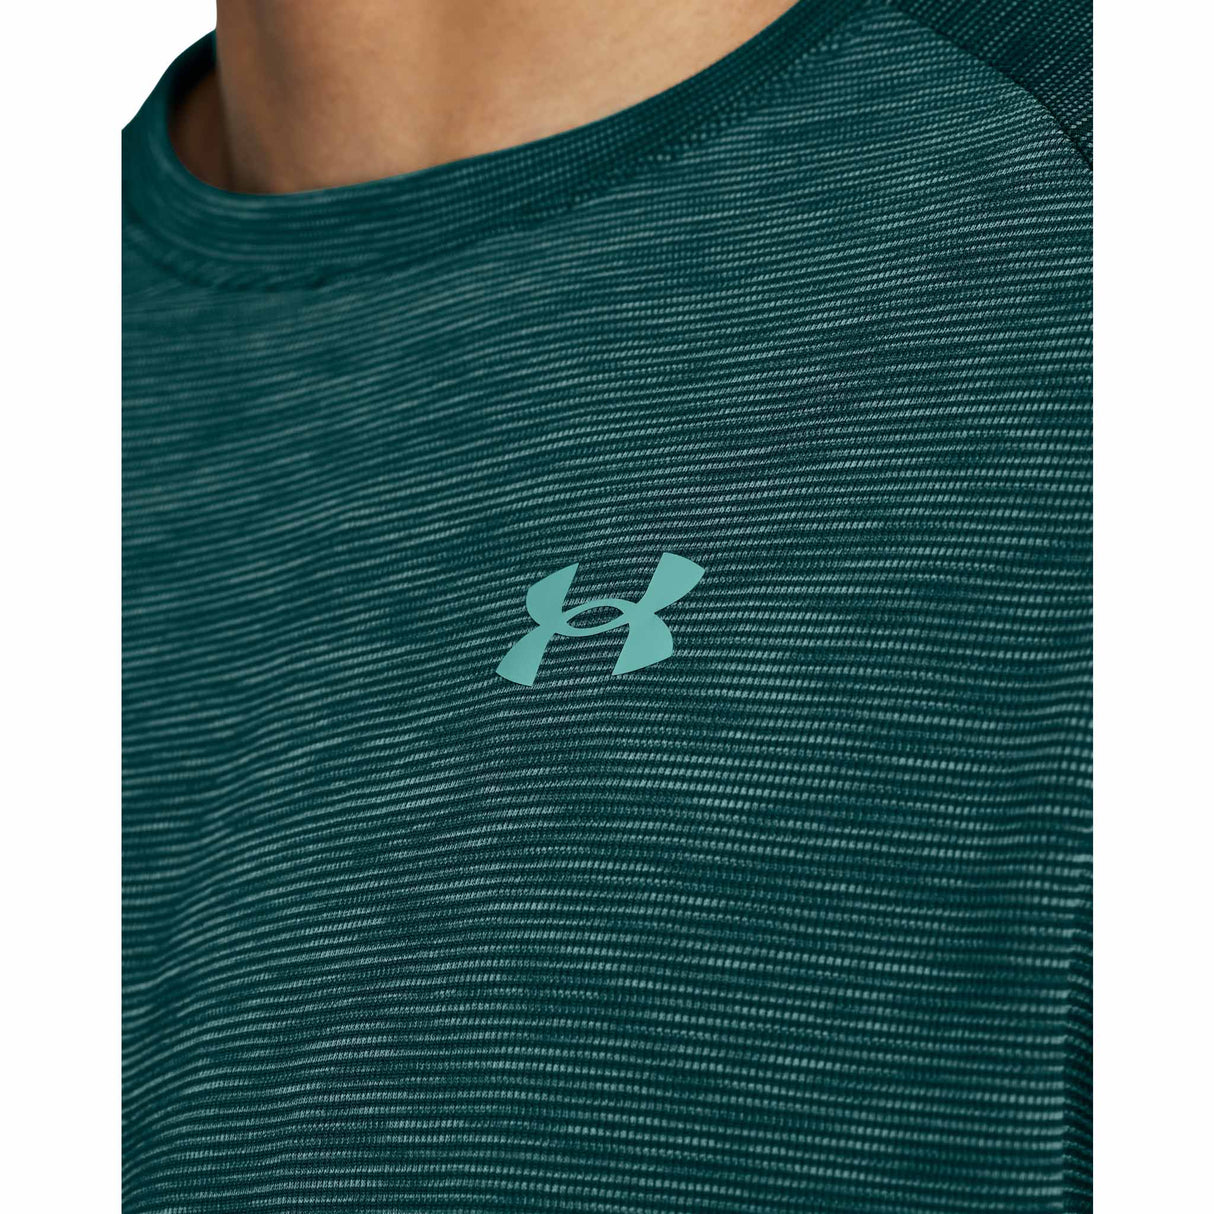 Under Armour Tech T-shirt sport homme details live -Hydro Teal / Radial Turquoise